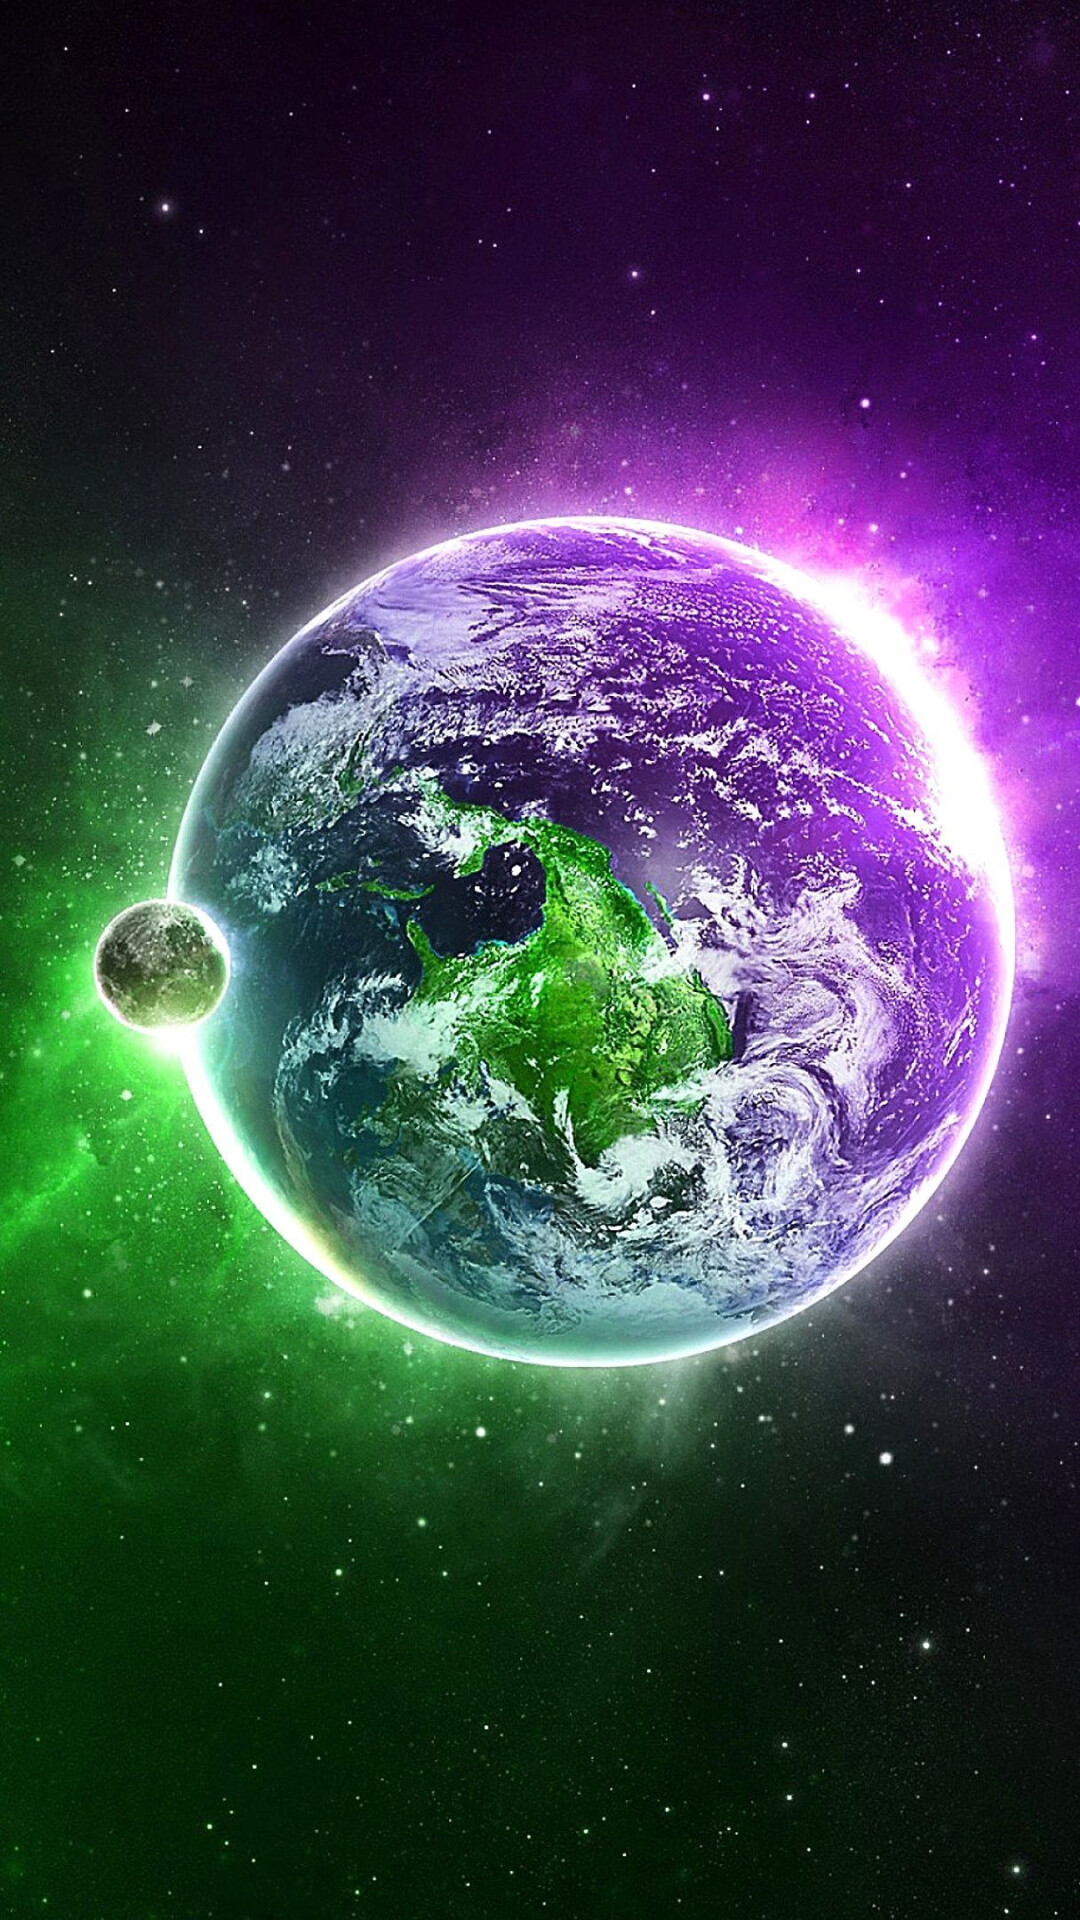 Go Green: Earth views from space, Preserving the planet, Making the earth a healthy and safe place to live in. 1080x1920 Full HD Background.